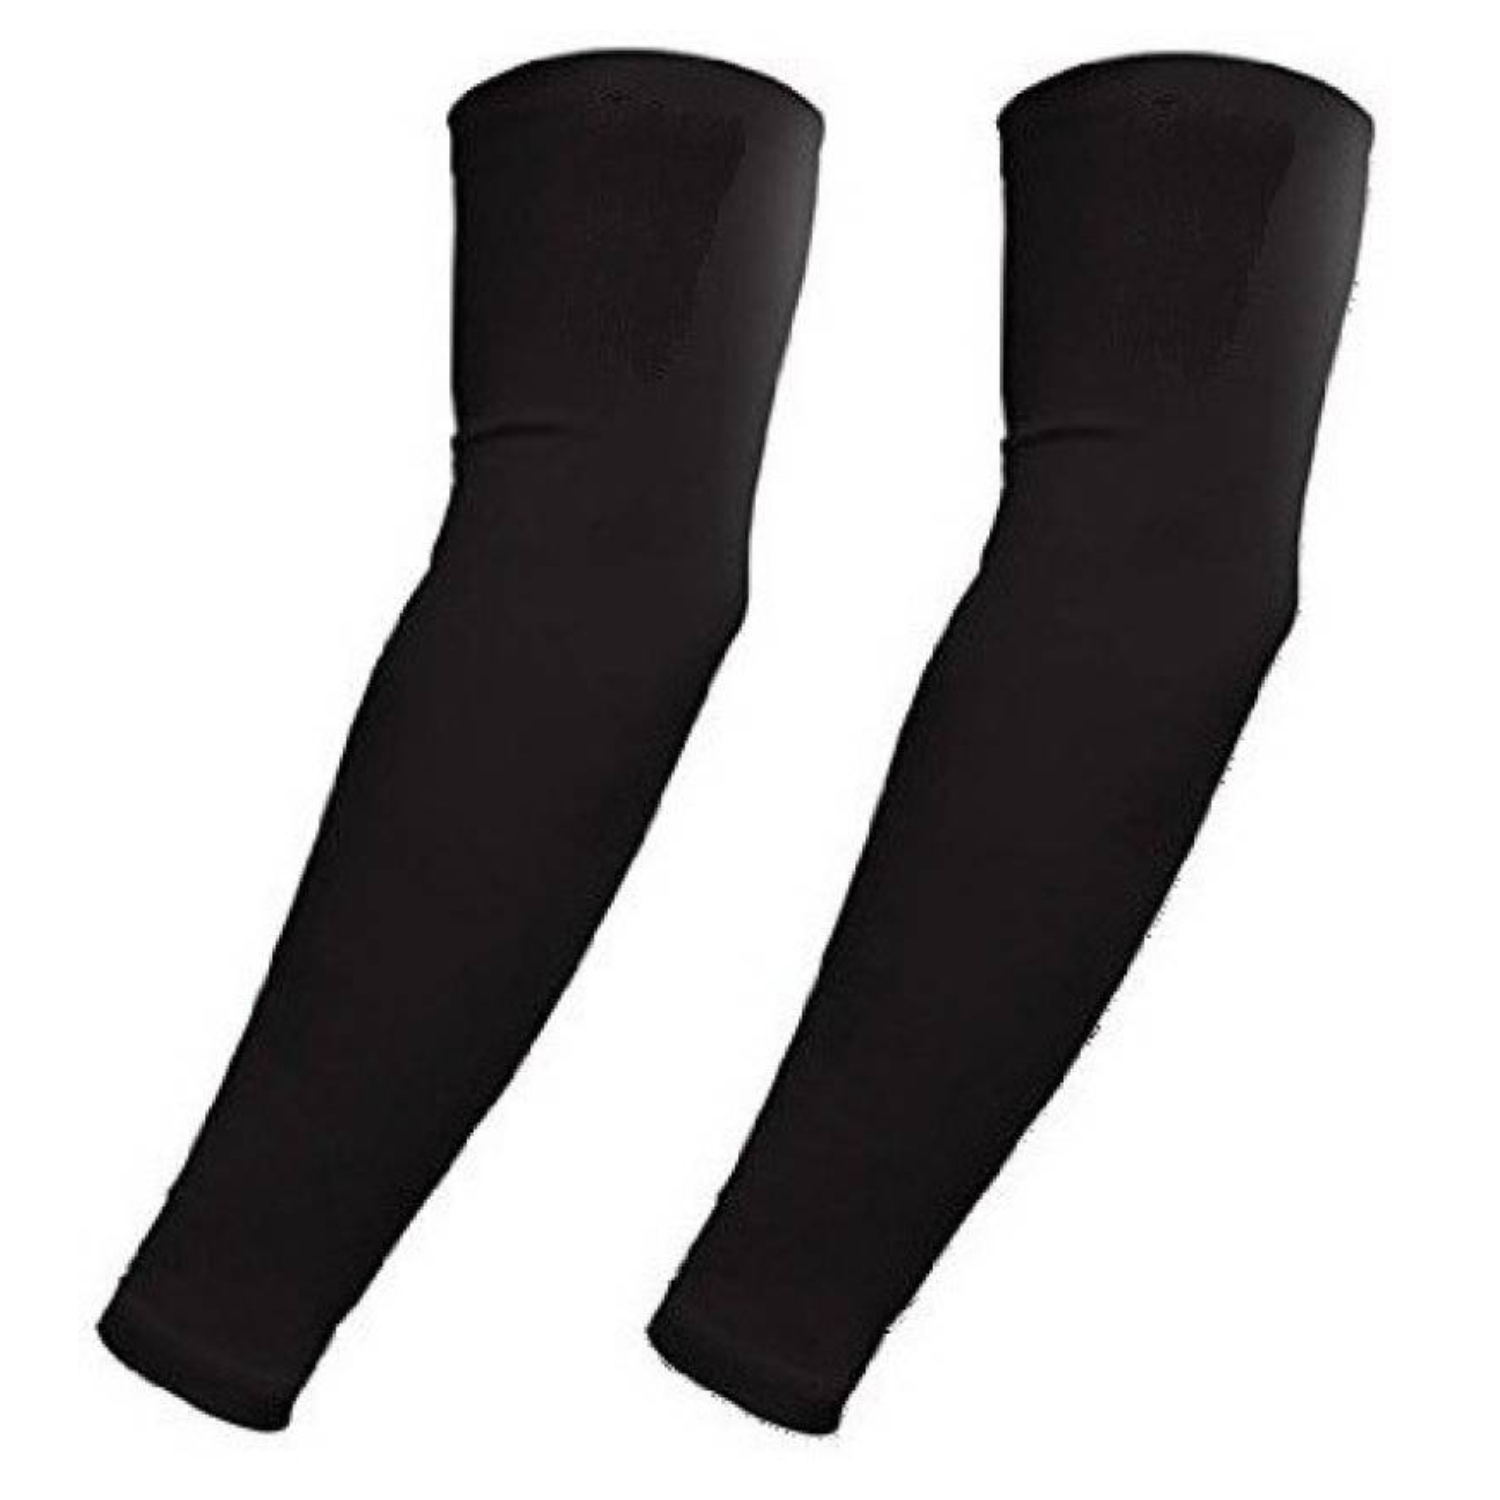 HMS Black Universal Wet And Dry Sunlight Protection Arm Sleeves  Set of 1 